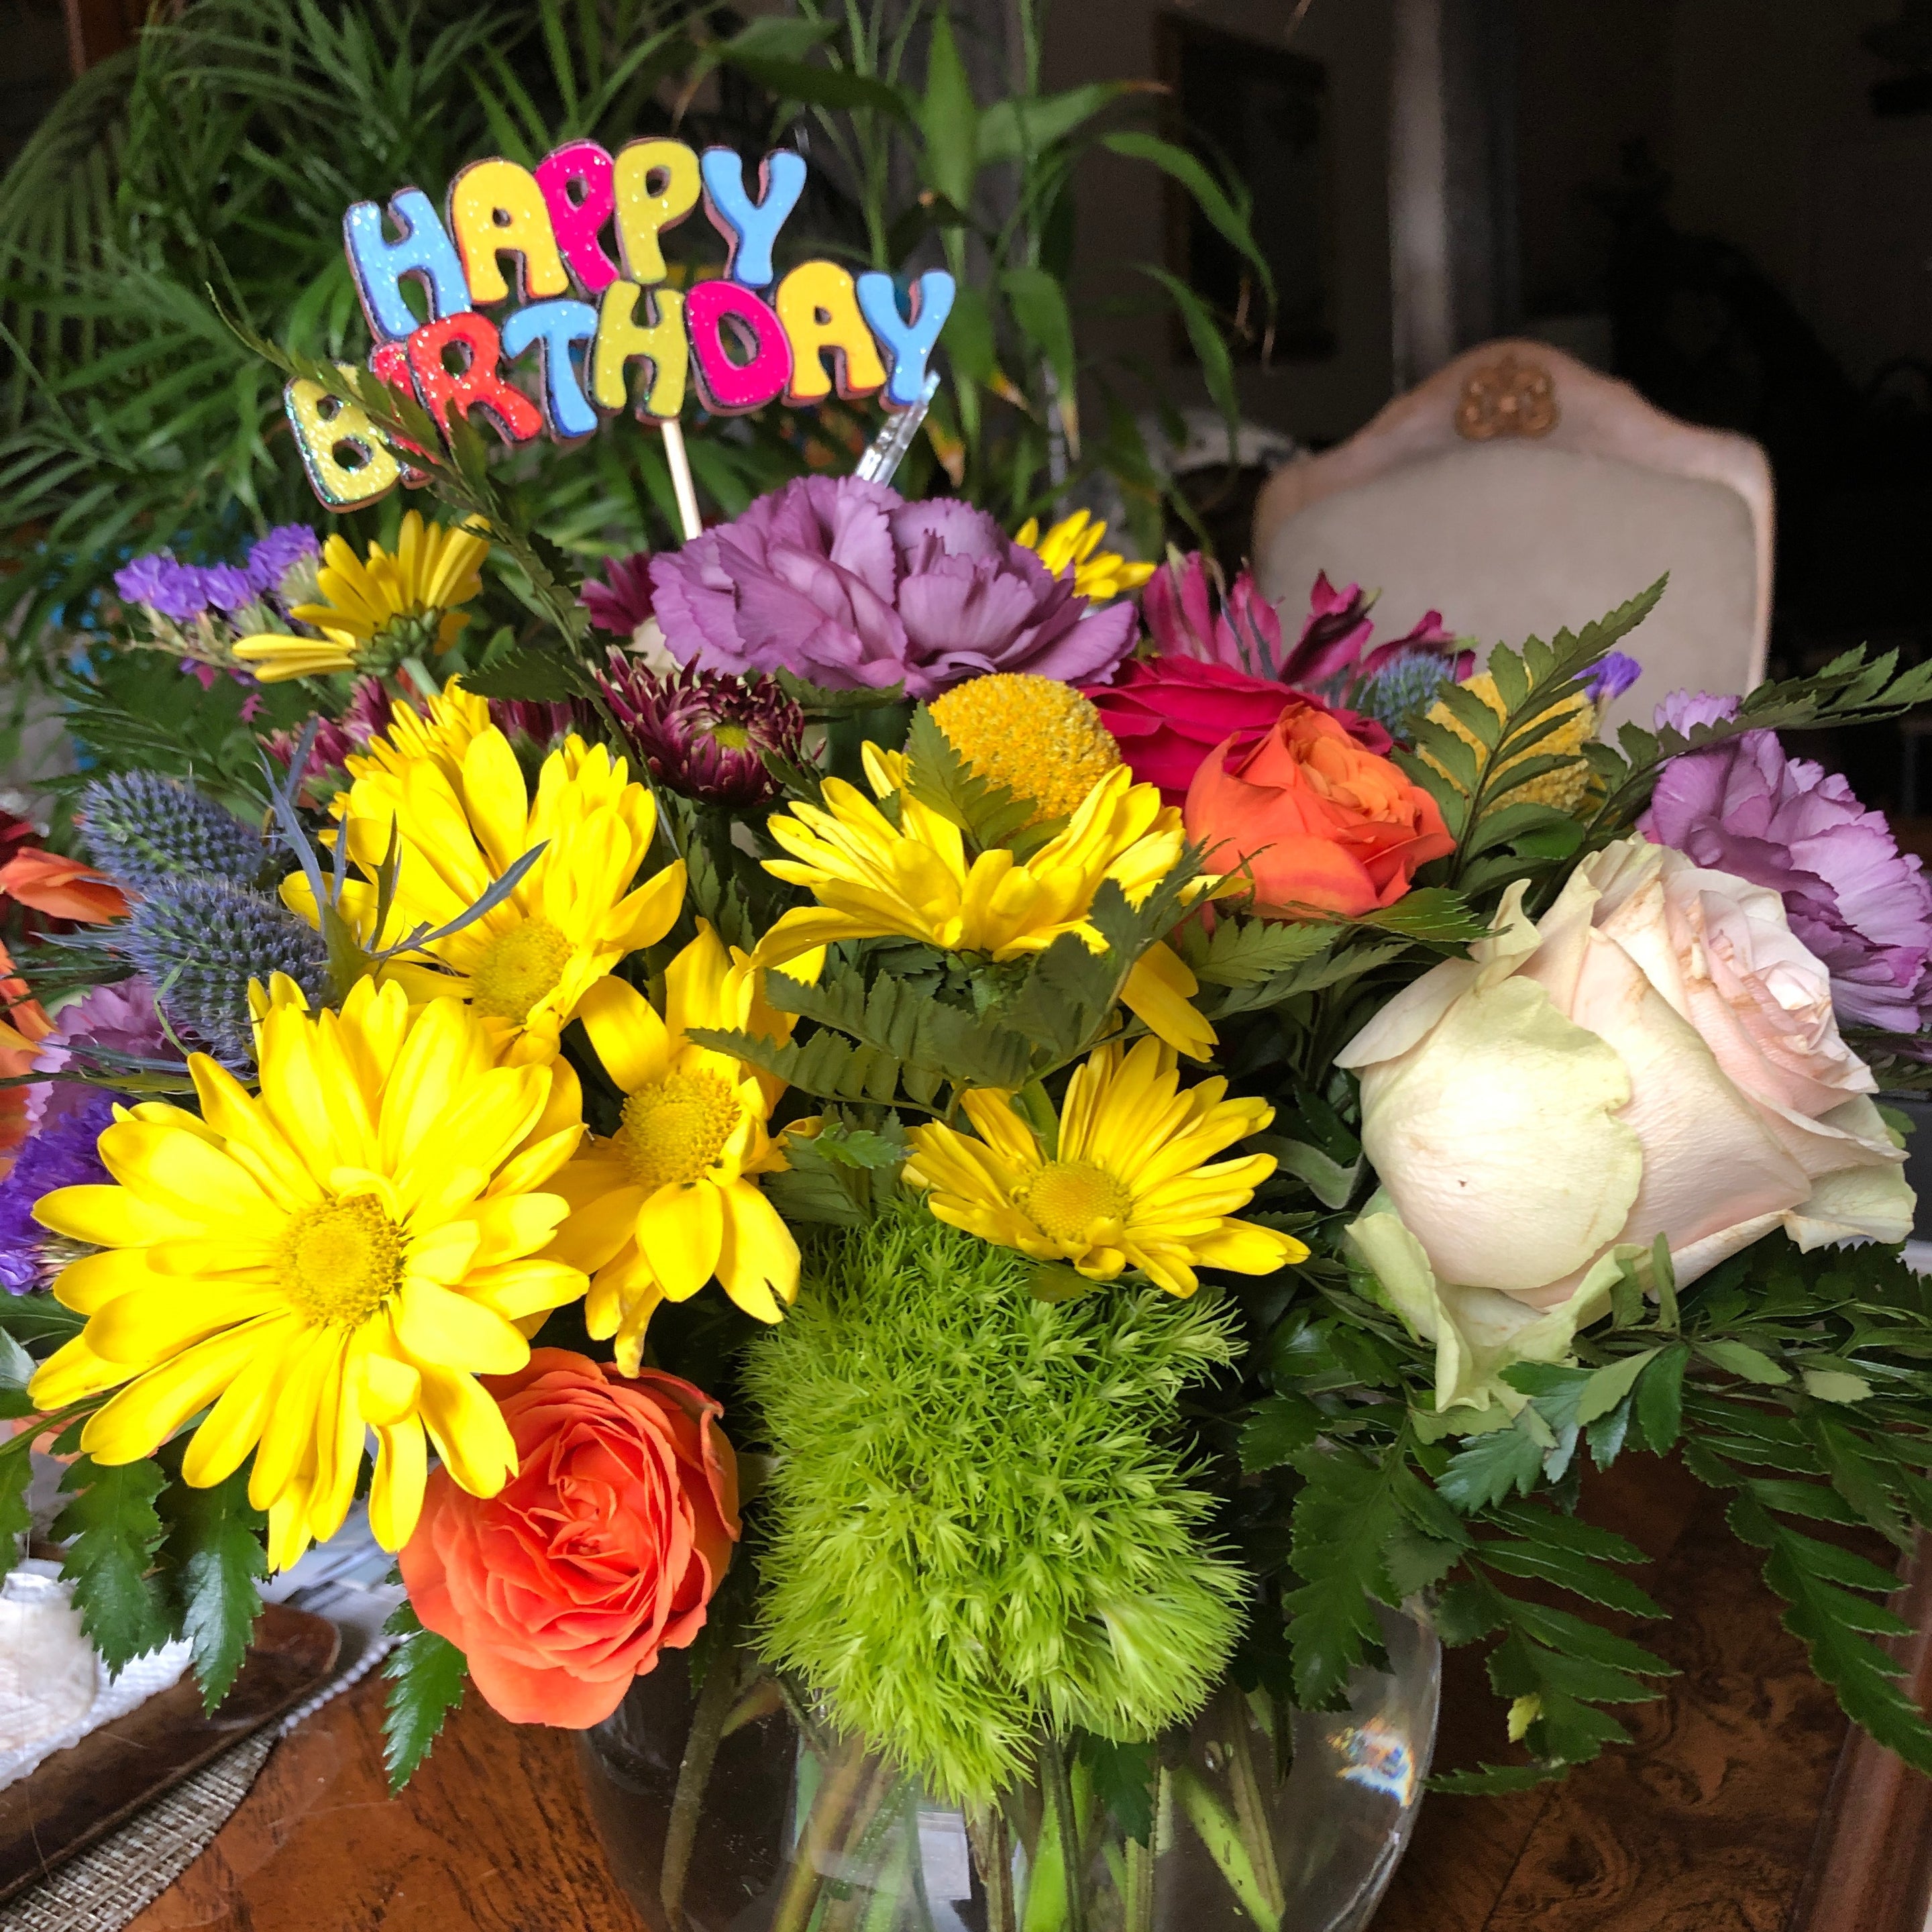 Recipient-submitted photo of Birthday Blast. Flower arrangement on table with a "Happy Birthday" decoration.